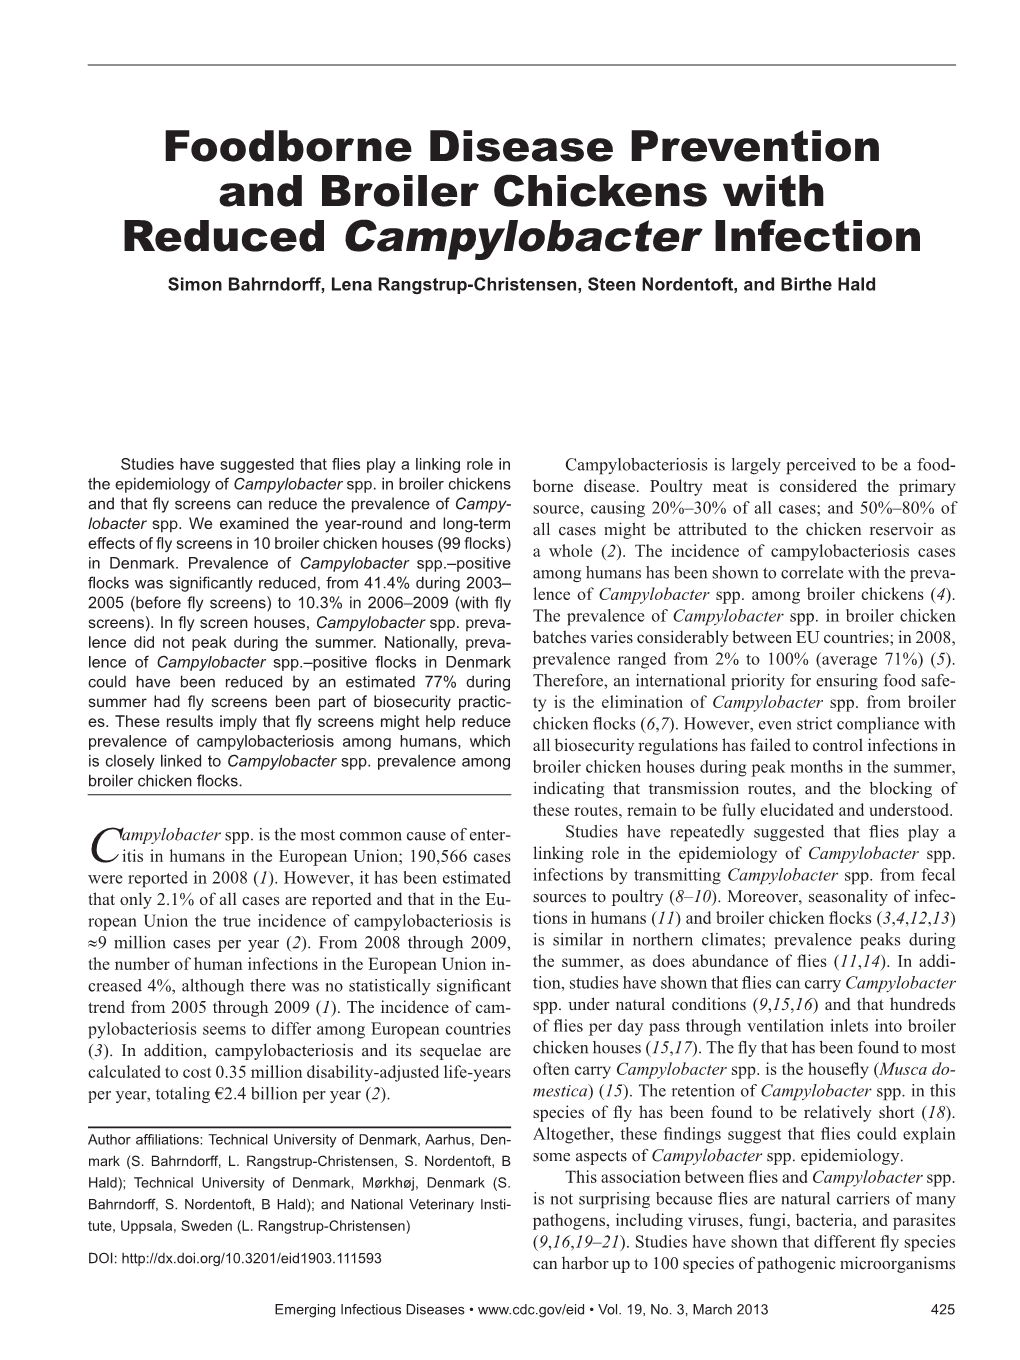 Foodborne Disease Prevention and Broiler Chickens with Reduced Campylobacter Infection Simon Bahrndorff, Lena Rangstrup-Christensen, Steen Nordentoft, and Birthe Hald